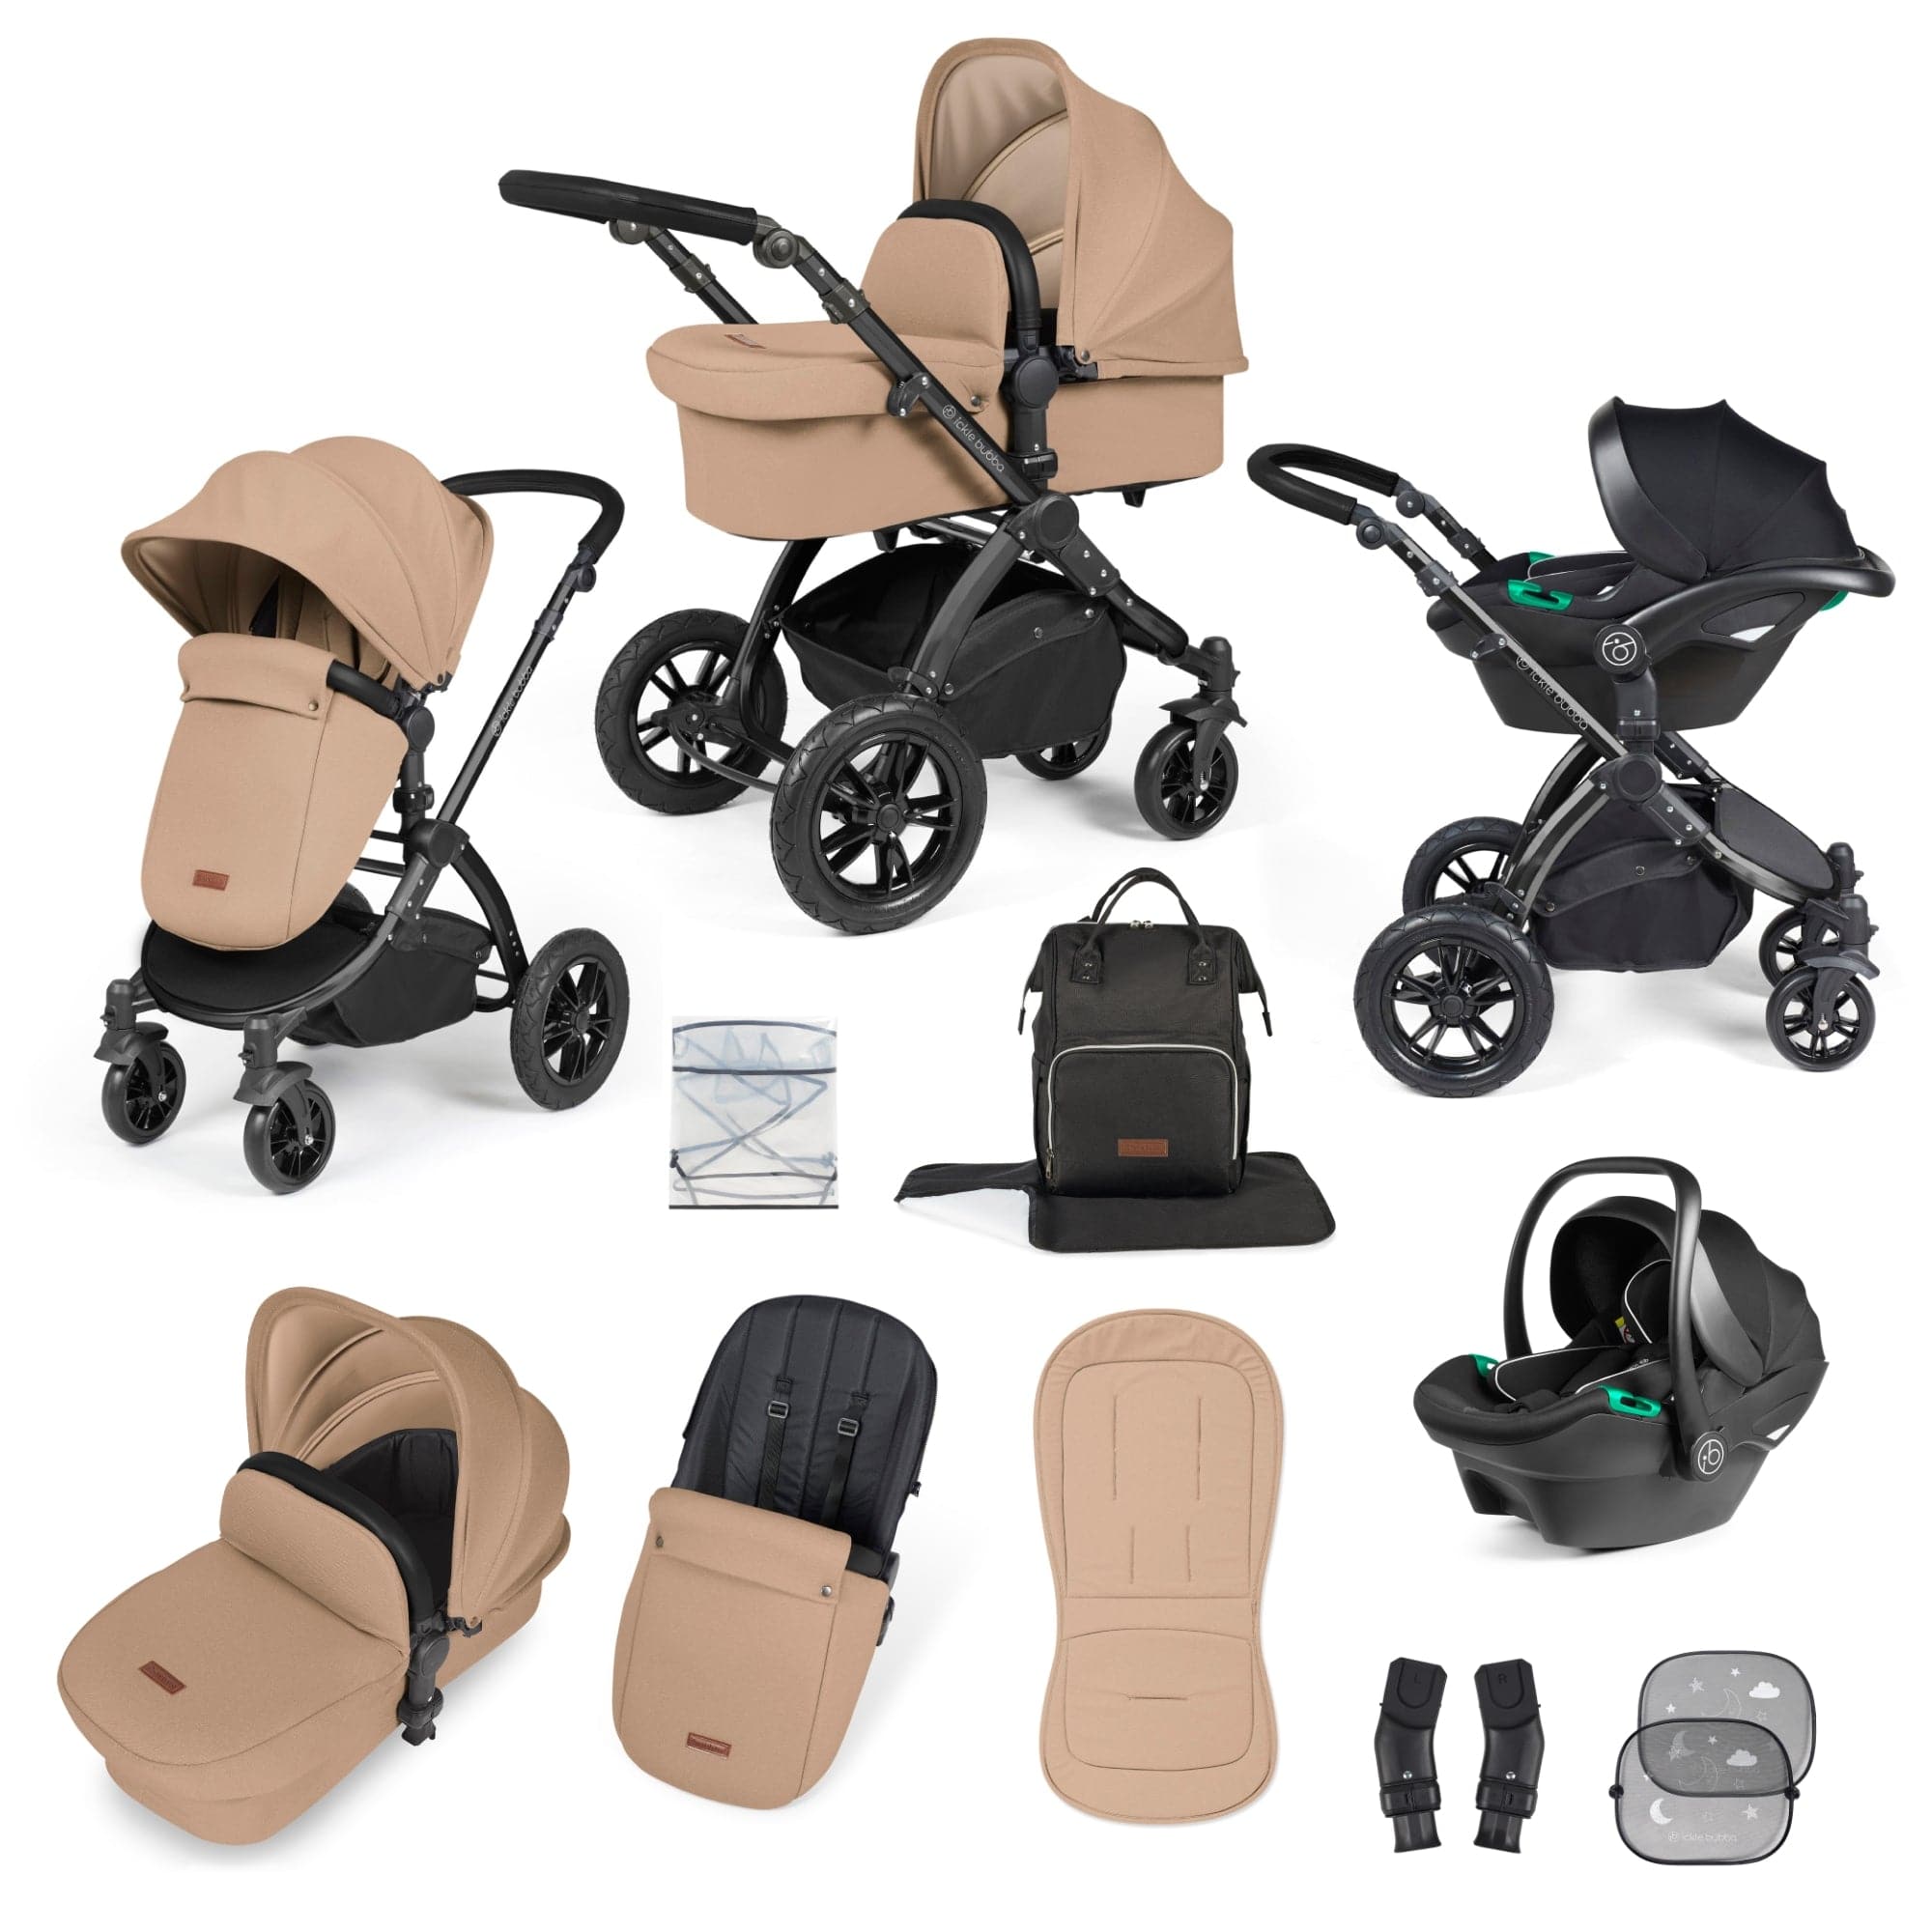 Ickle Bubba Stomp Luxe All-In-One I-Size Travel System With Isofix Base - Black / Desert / Black   